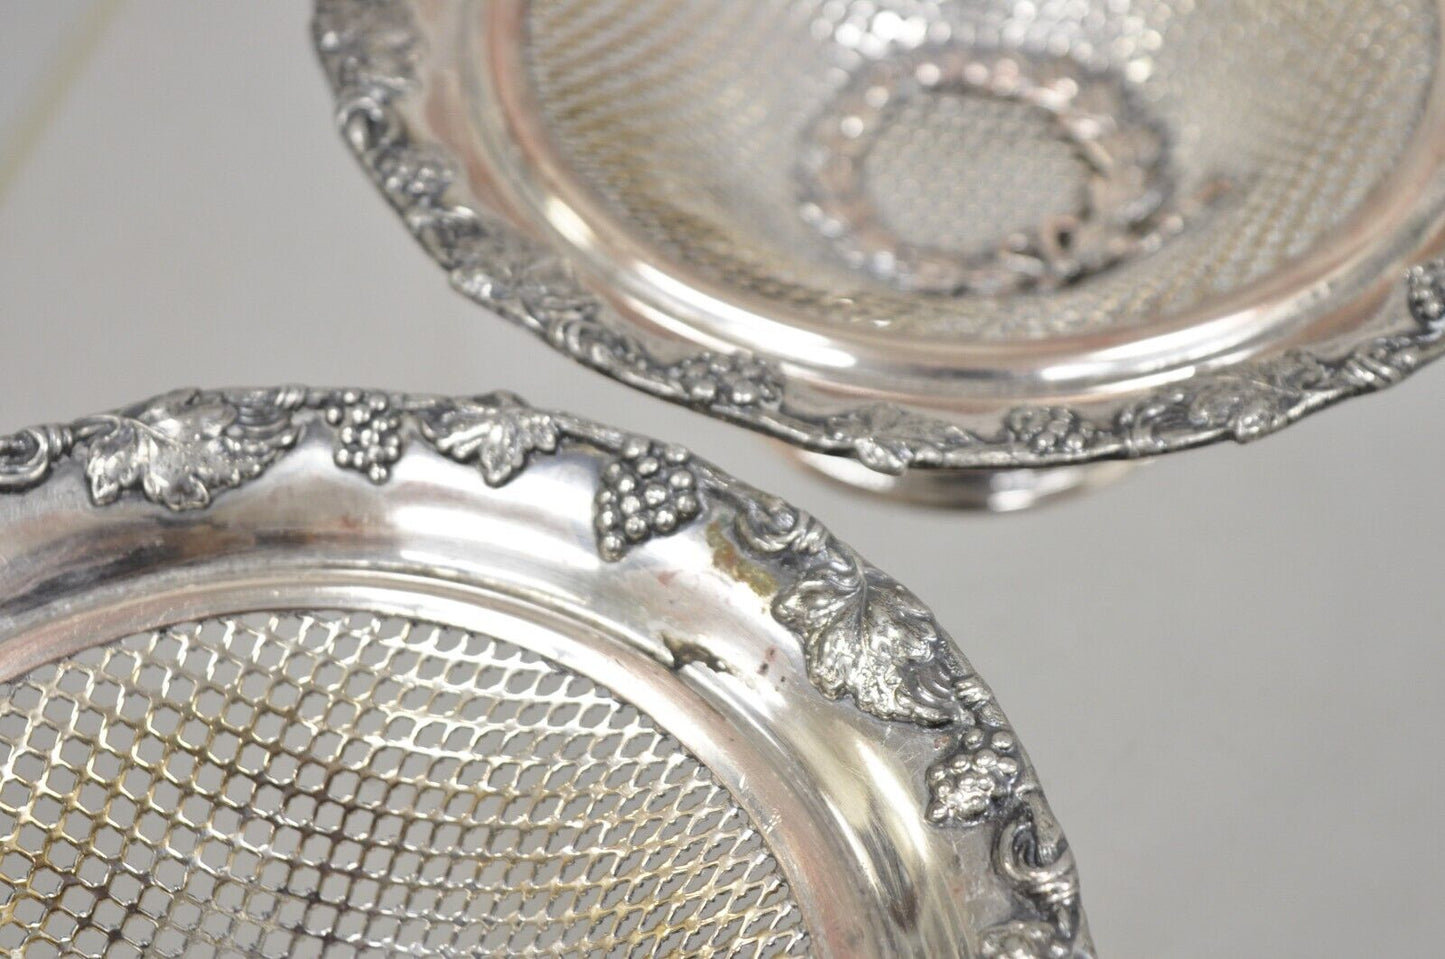 English Edwardian Silver Plated Wreath Design Small Mesh Basket Candy Dish -Pair